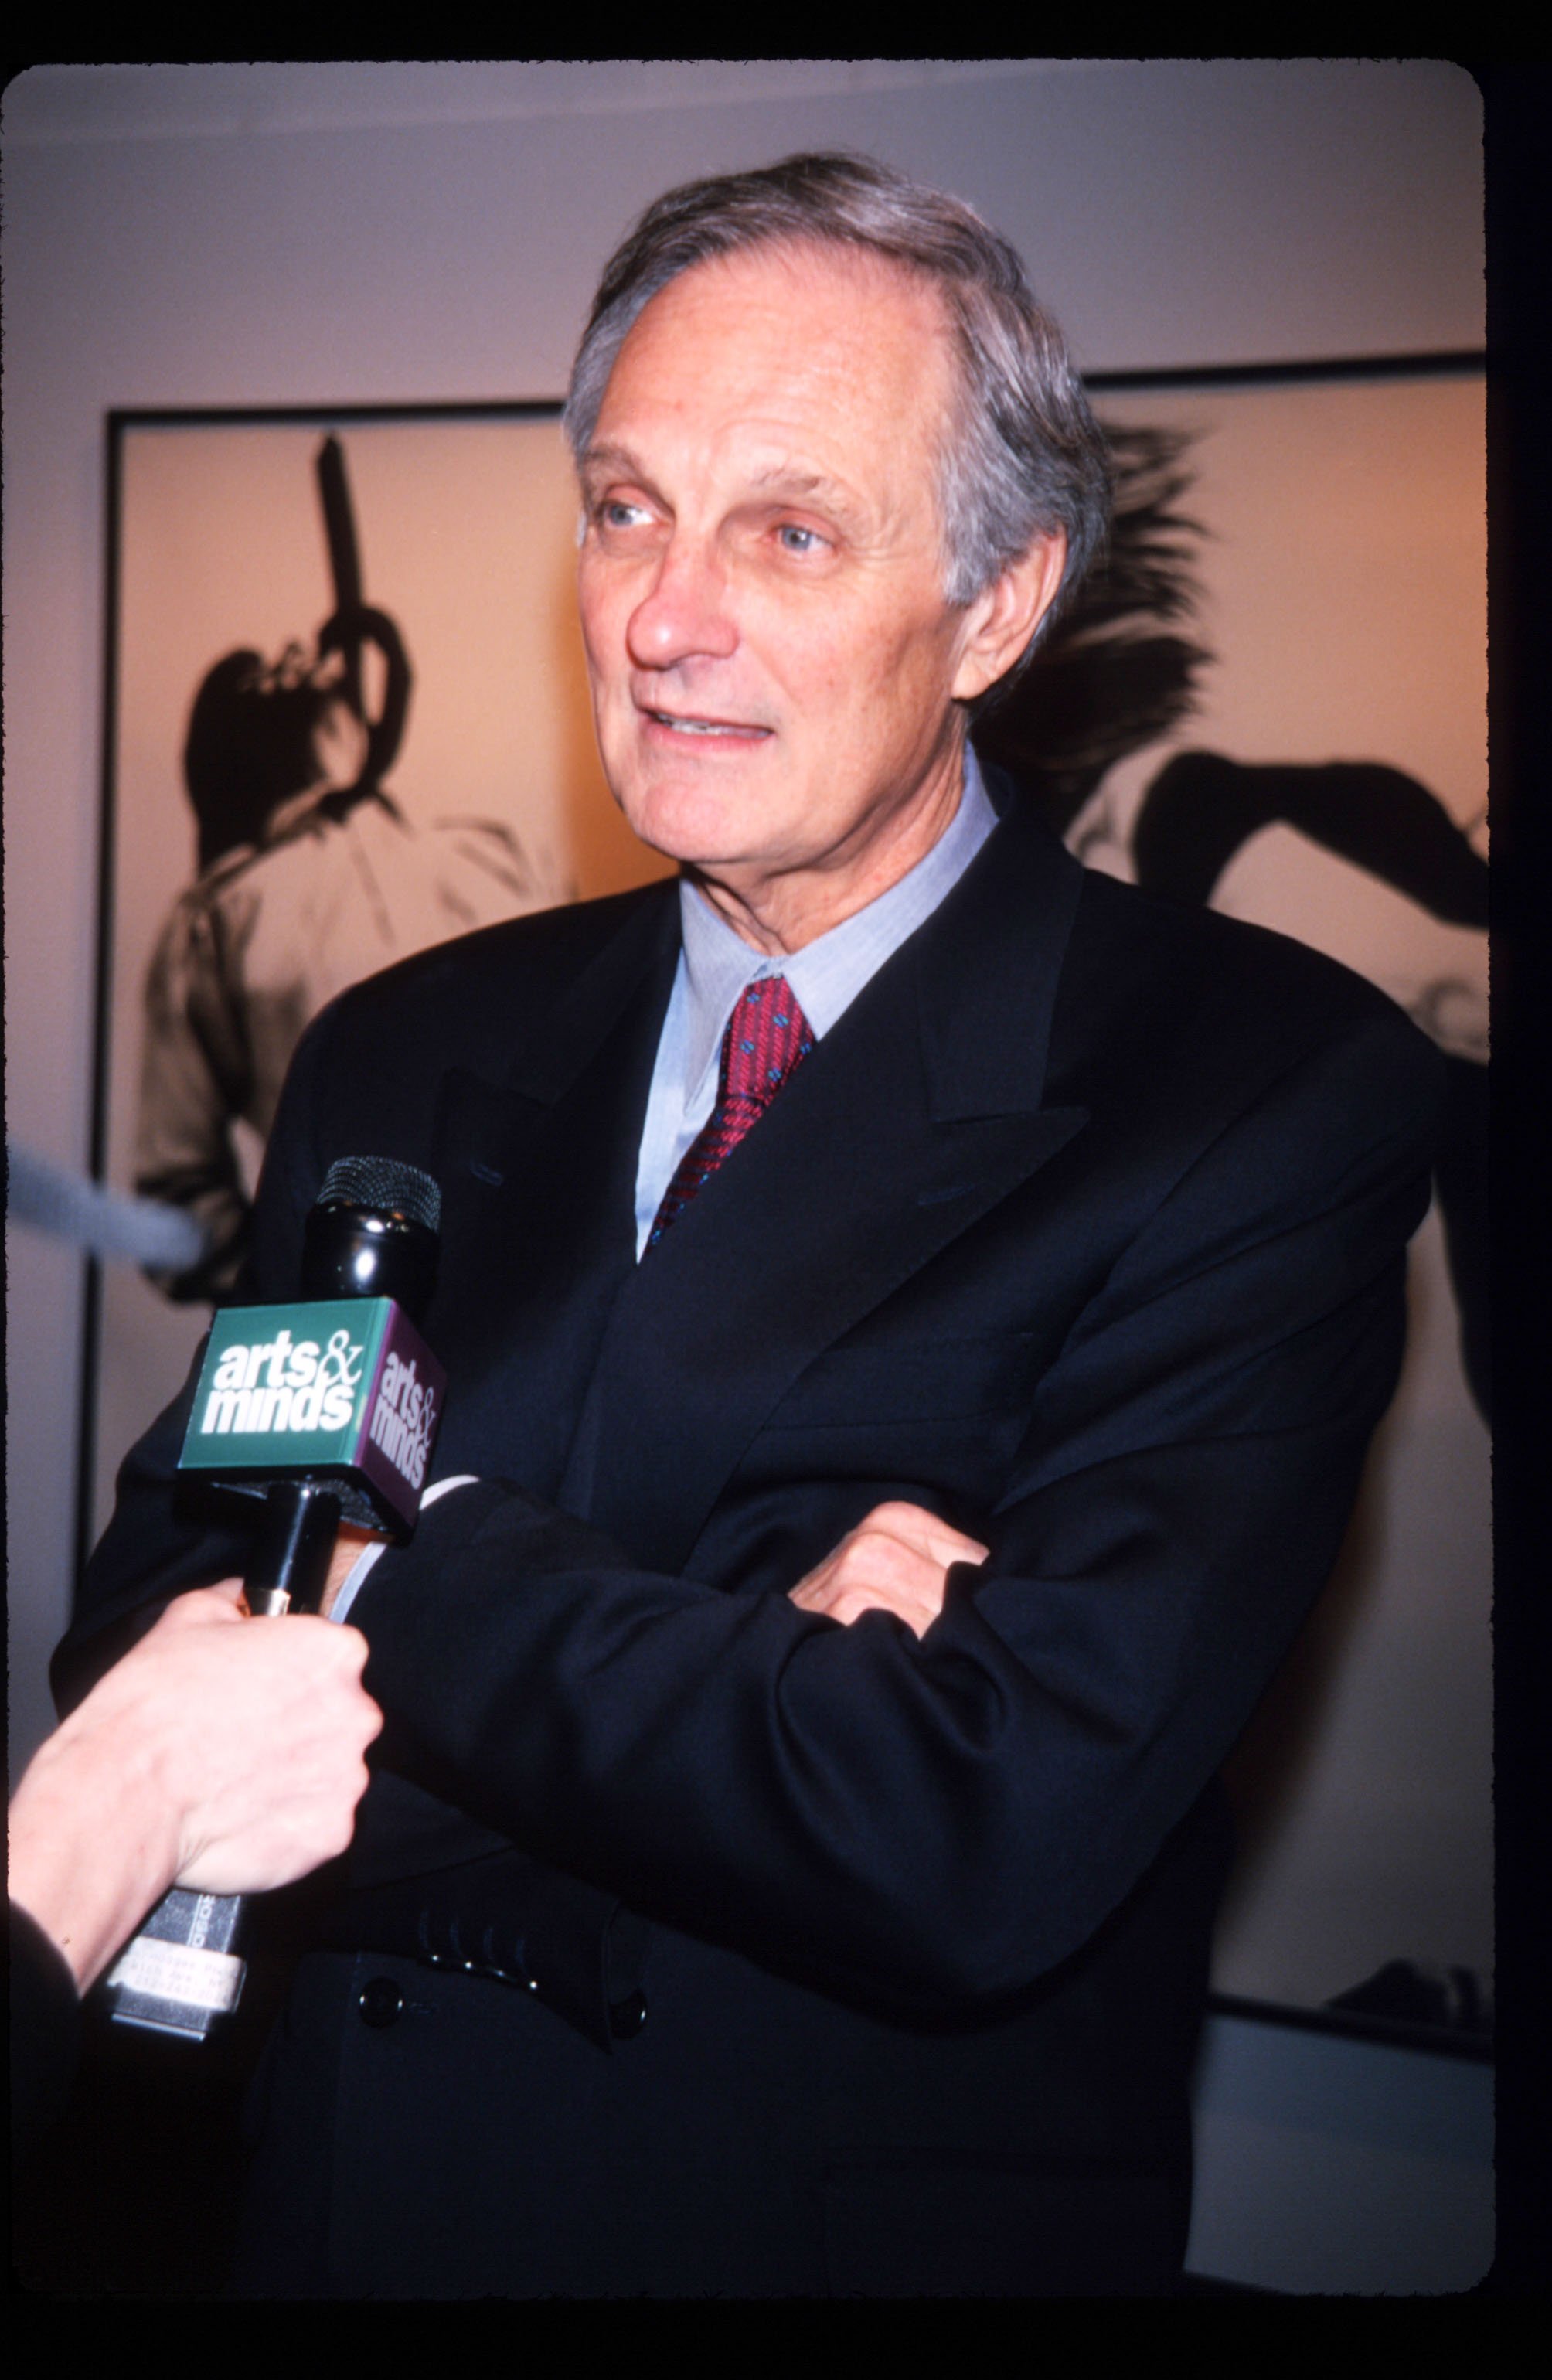 Alan Alda attends the premiere of "Art" in New York City on March 1, 1998 | Photo: Getty Images